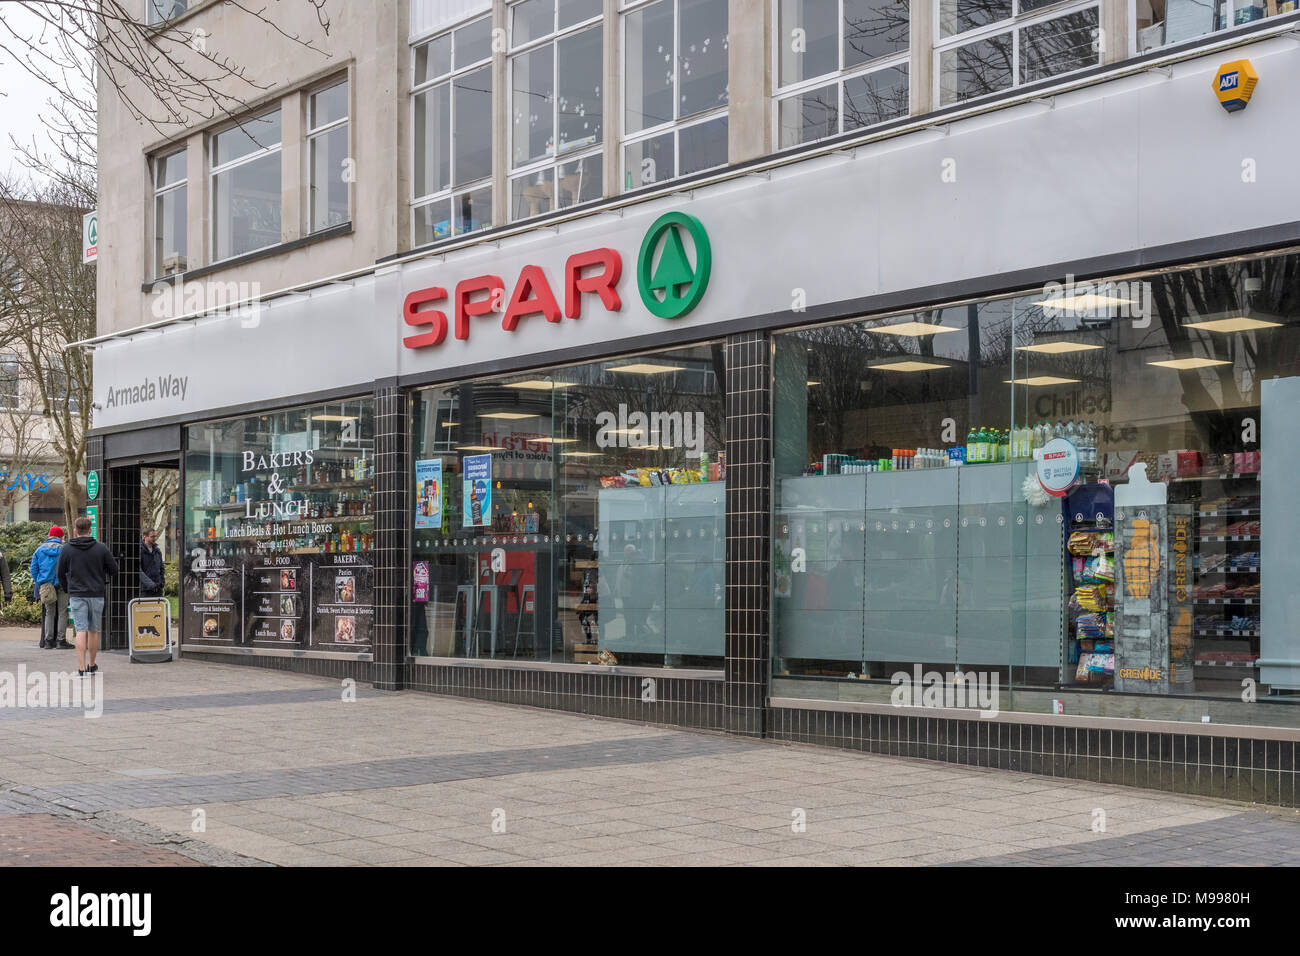 Death of the High Street metaphor / concept - Exterior of SPAR shop on Armada Way, Plymouth, Devon. UK supermarkets. Stock Photo